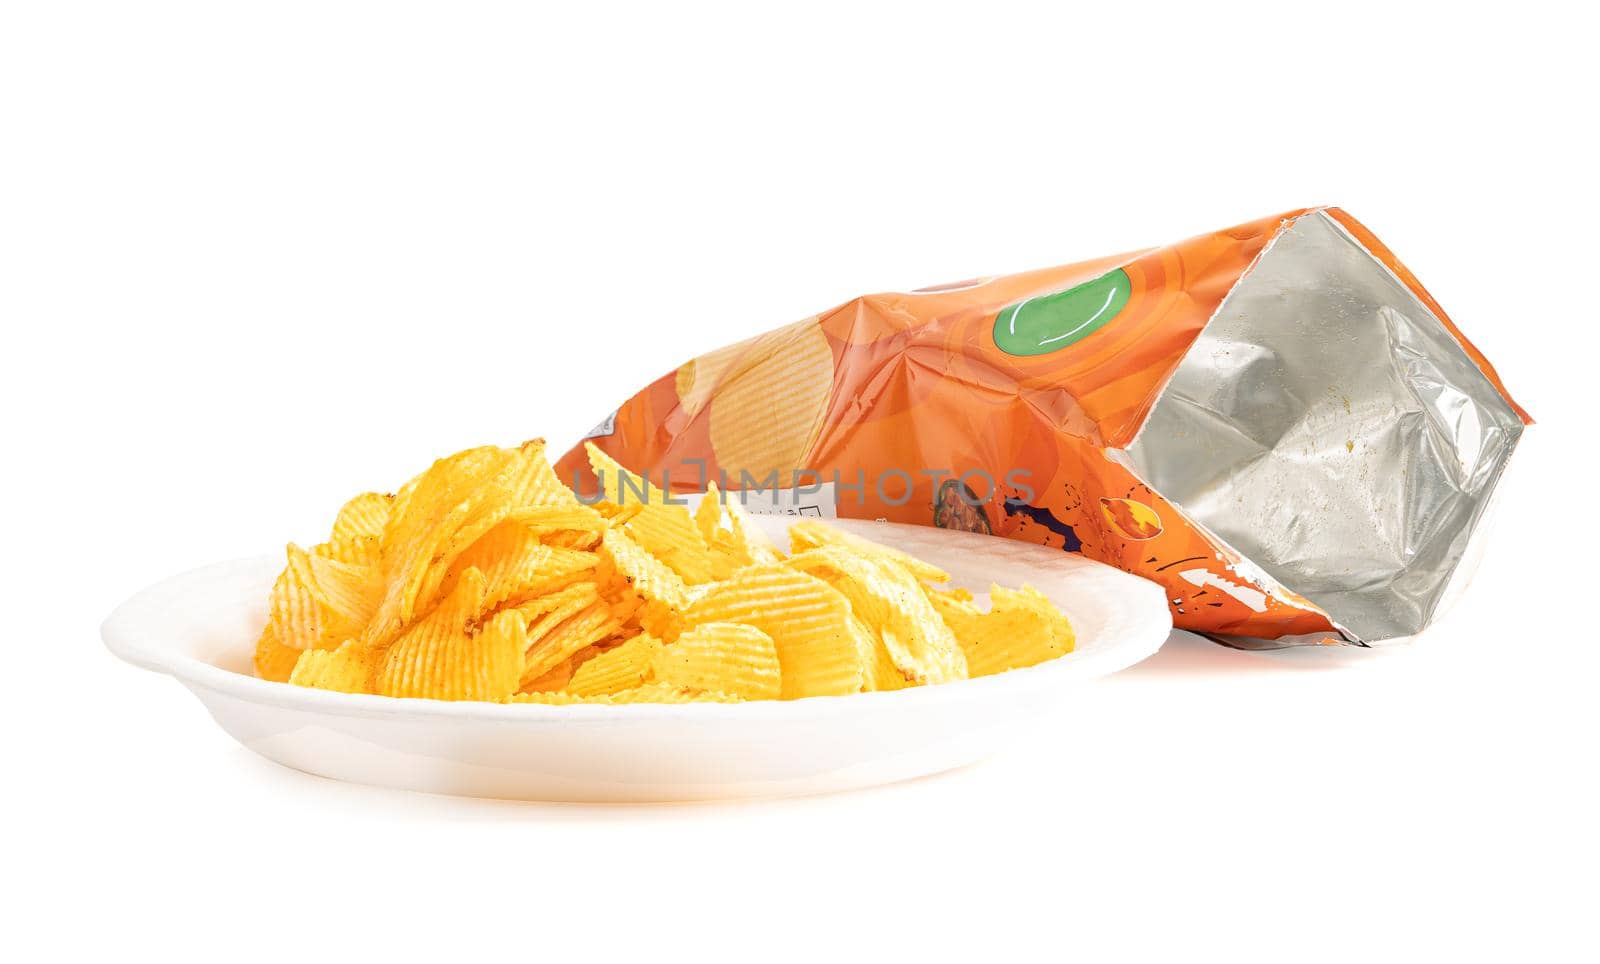 Potato chips, delicious BBQ seasoning spicy for crips, thin slice deep fried snack fast food with open bag. by pamai